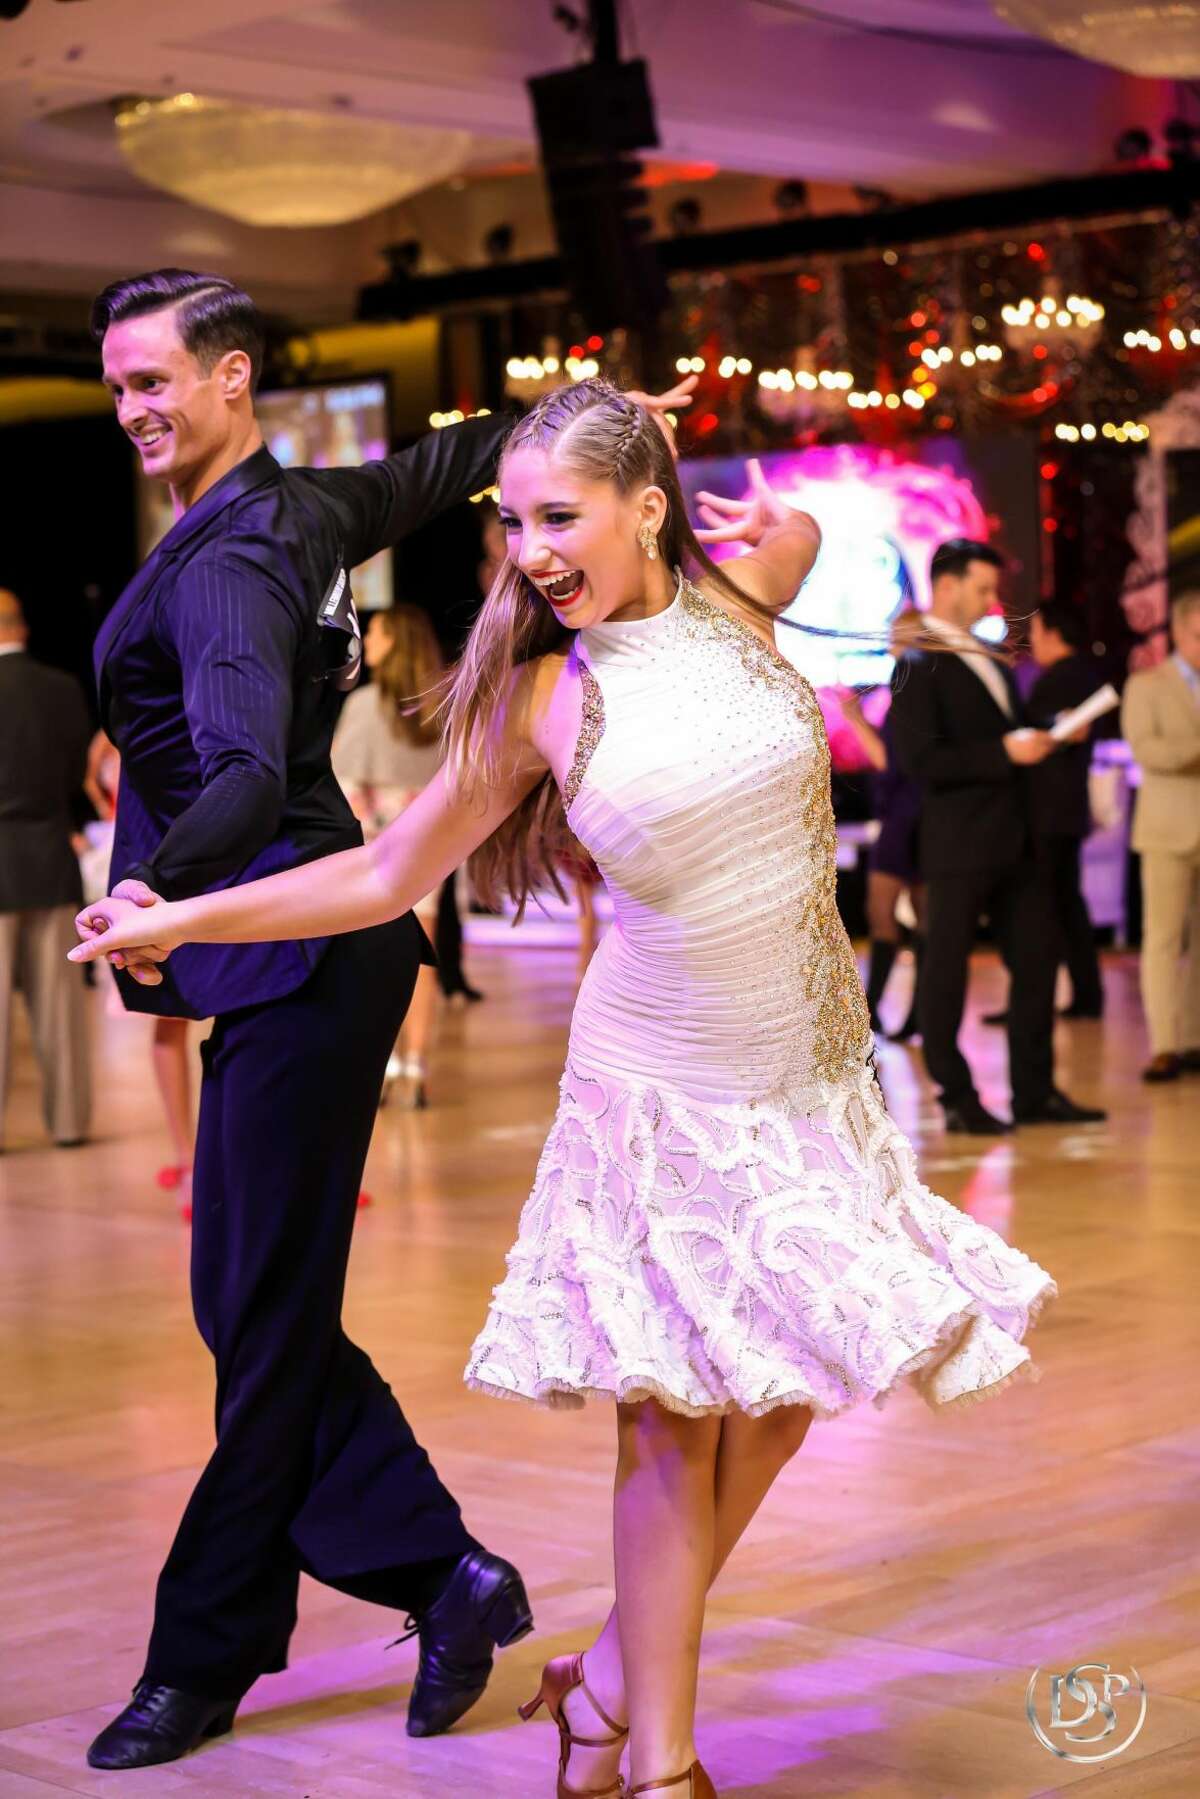 Strictly ballroom The remarkable journey of Ariel Mayer 14-year-old ballroom champion